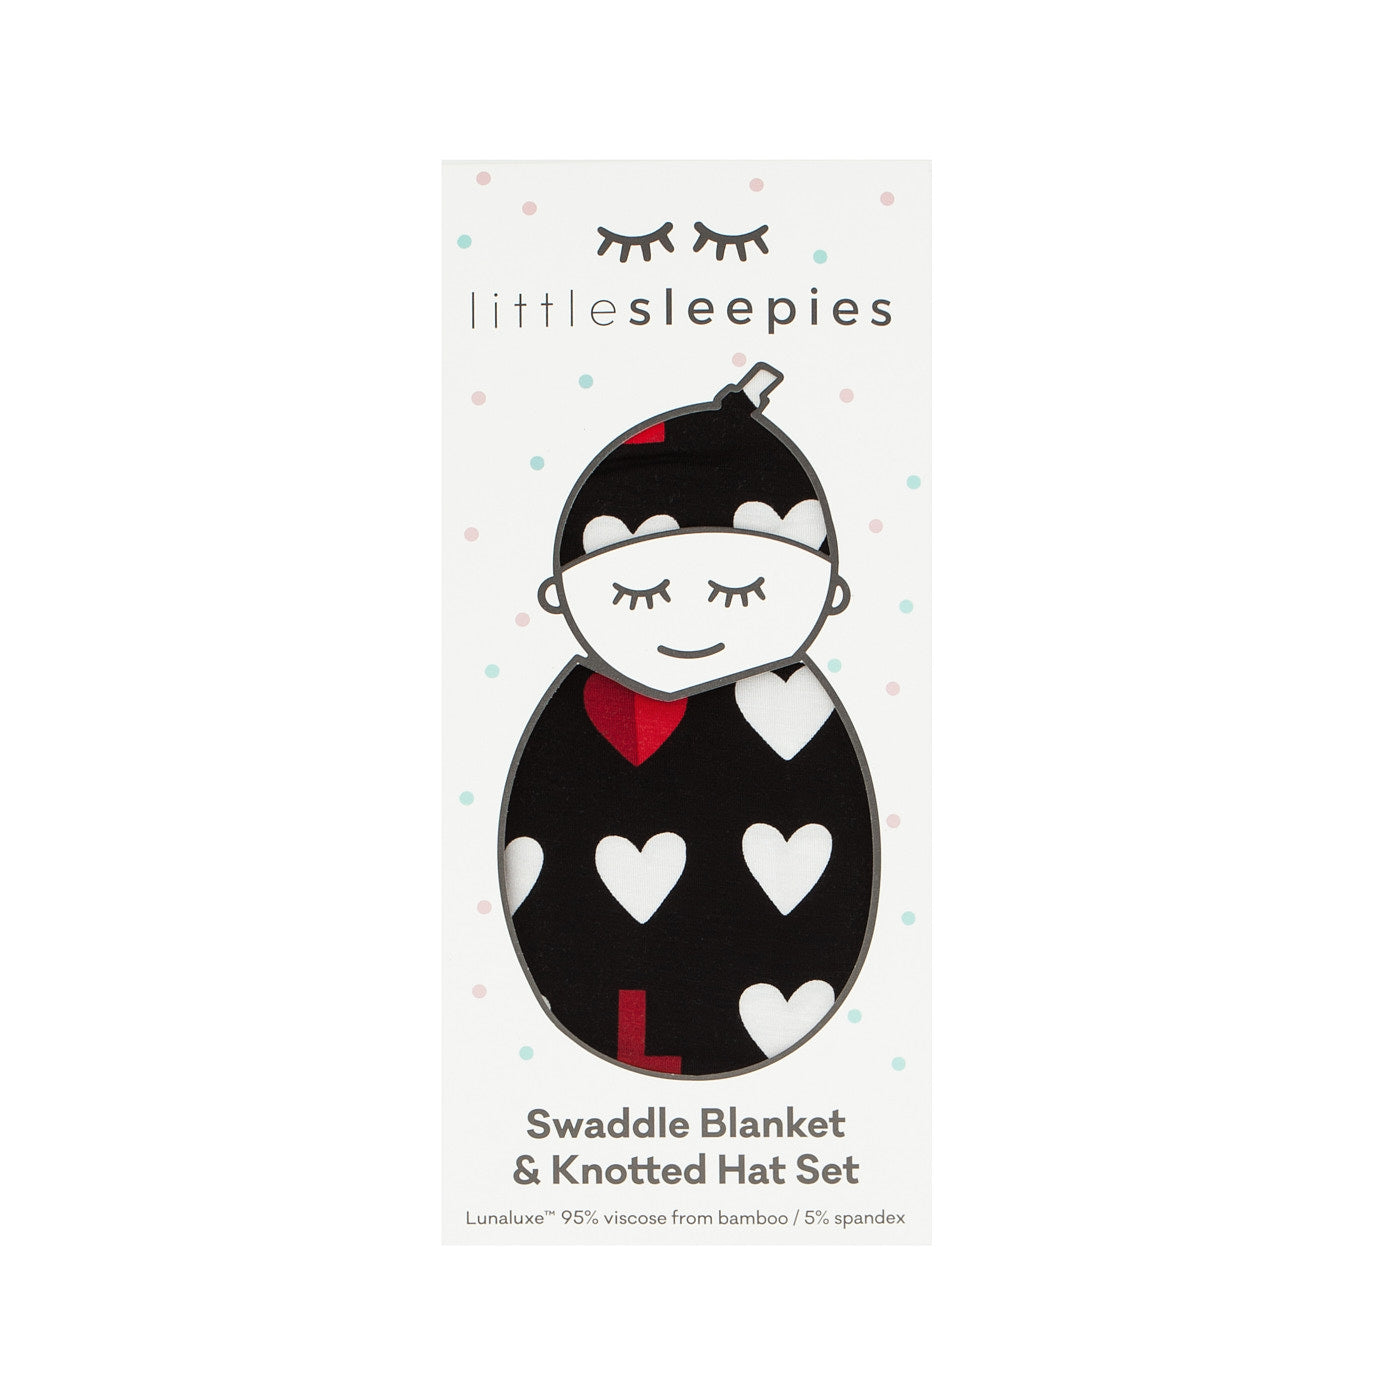 Image of a Black XOXO swaddle and hat set in Little Sleepies peek a boo packaging